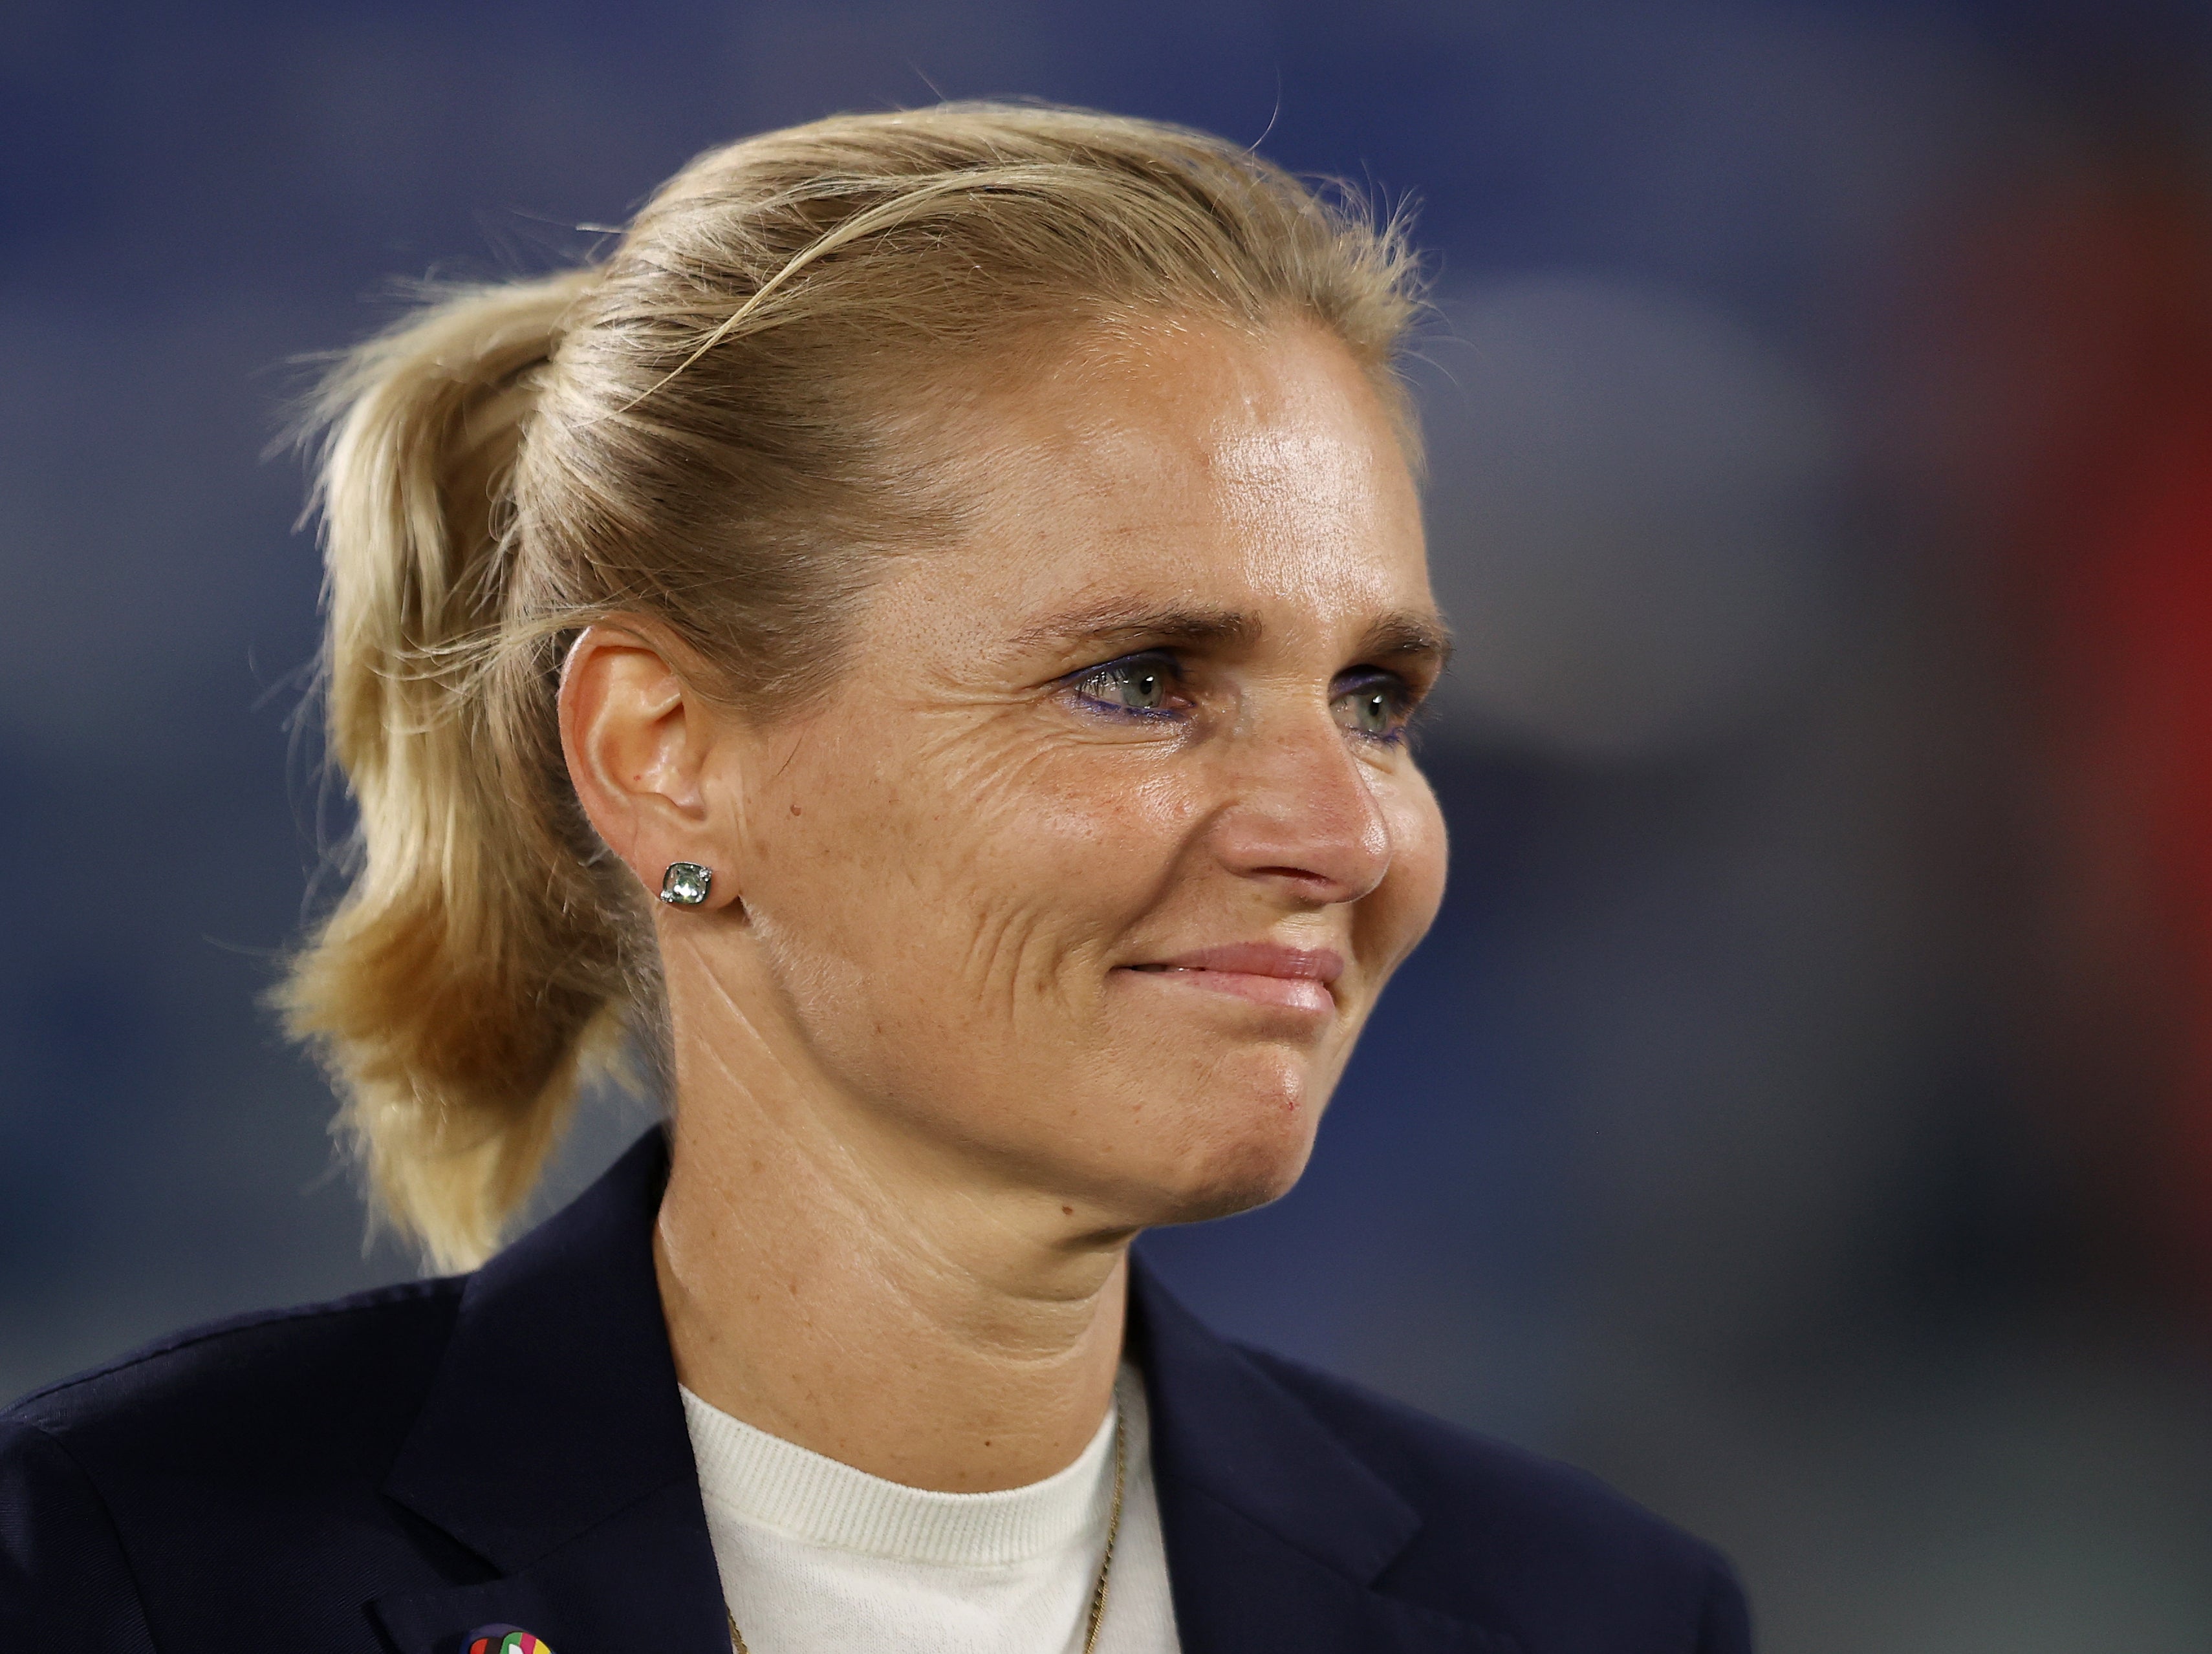 Sarina Wiegman has left her role as Netherlands coach to lead England Women